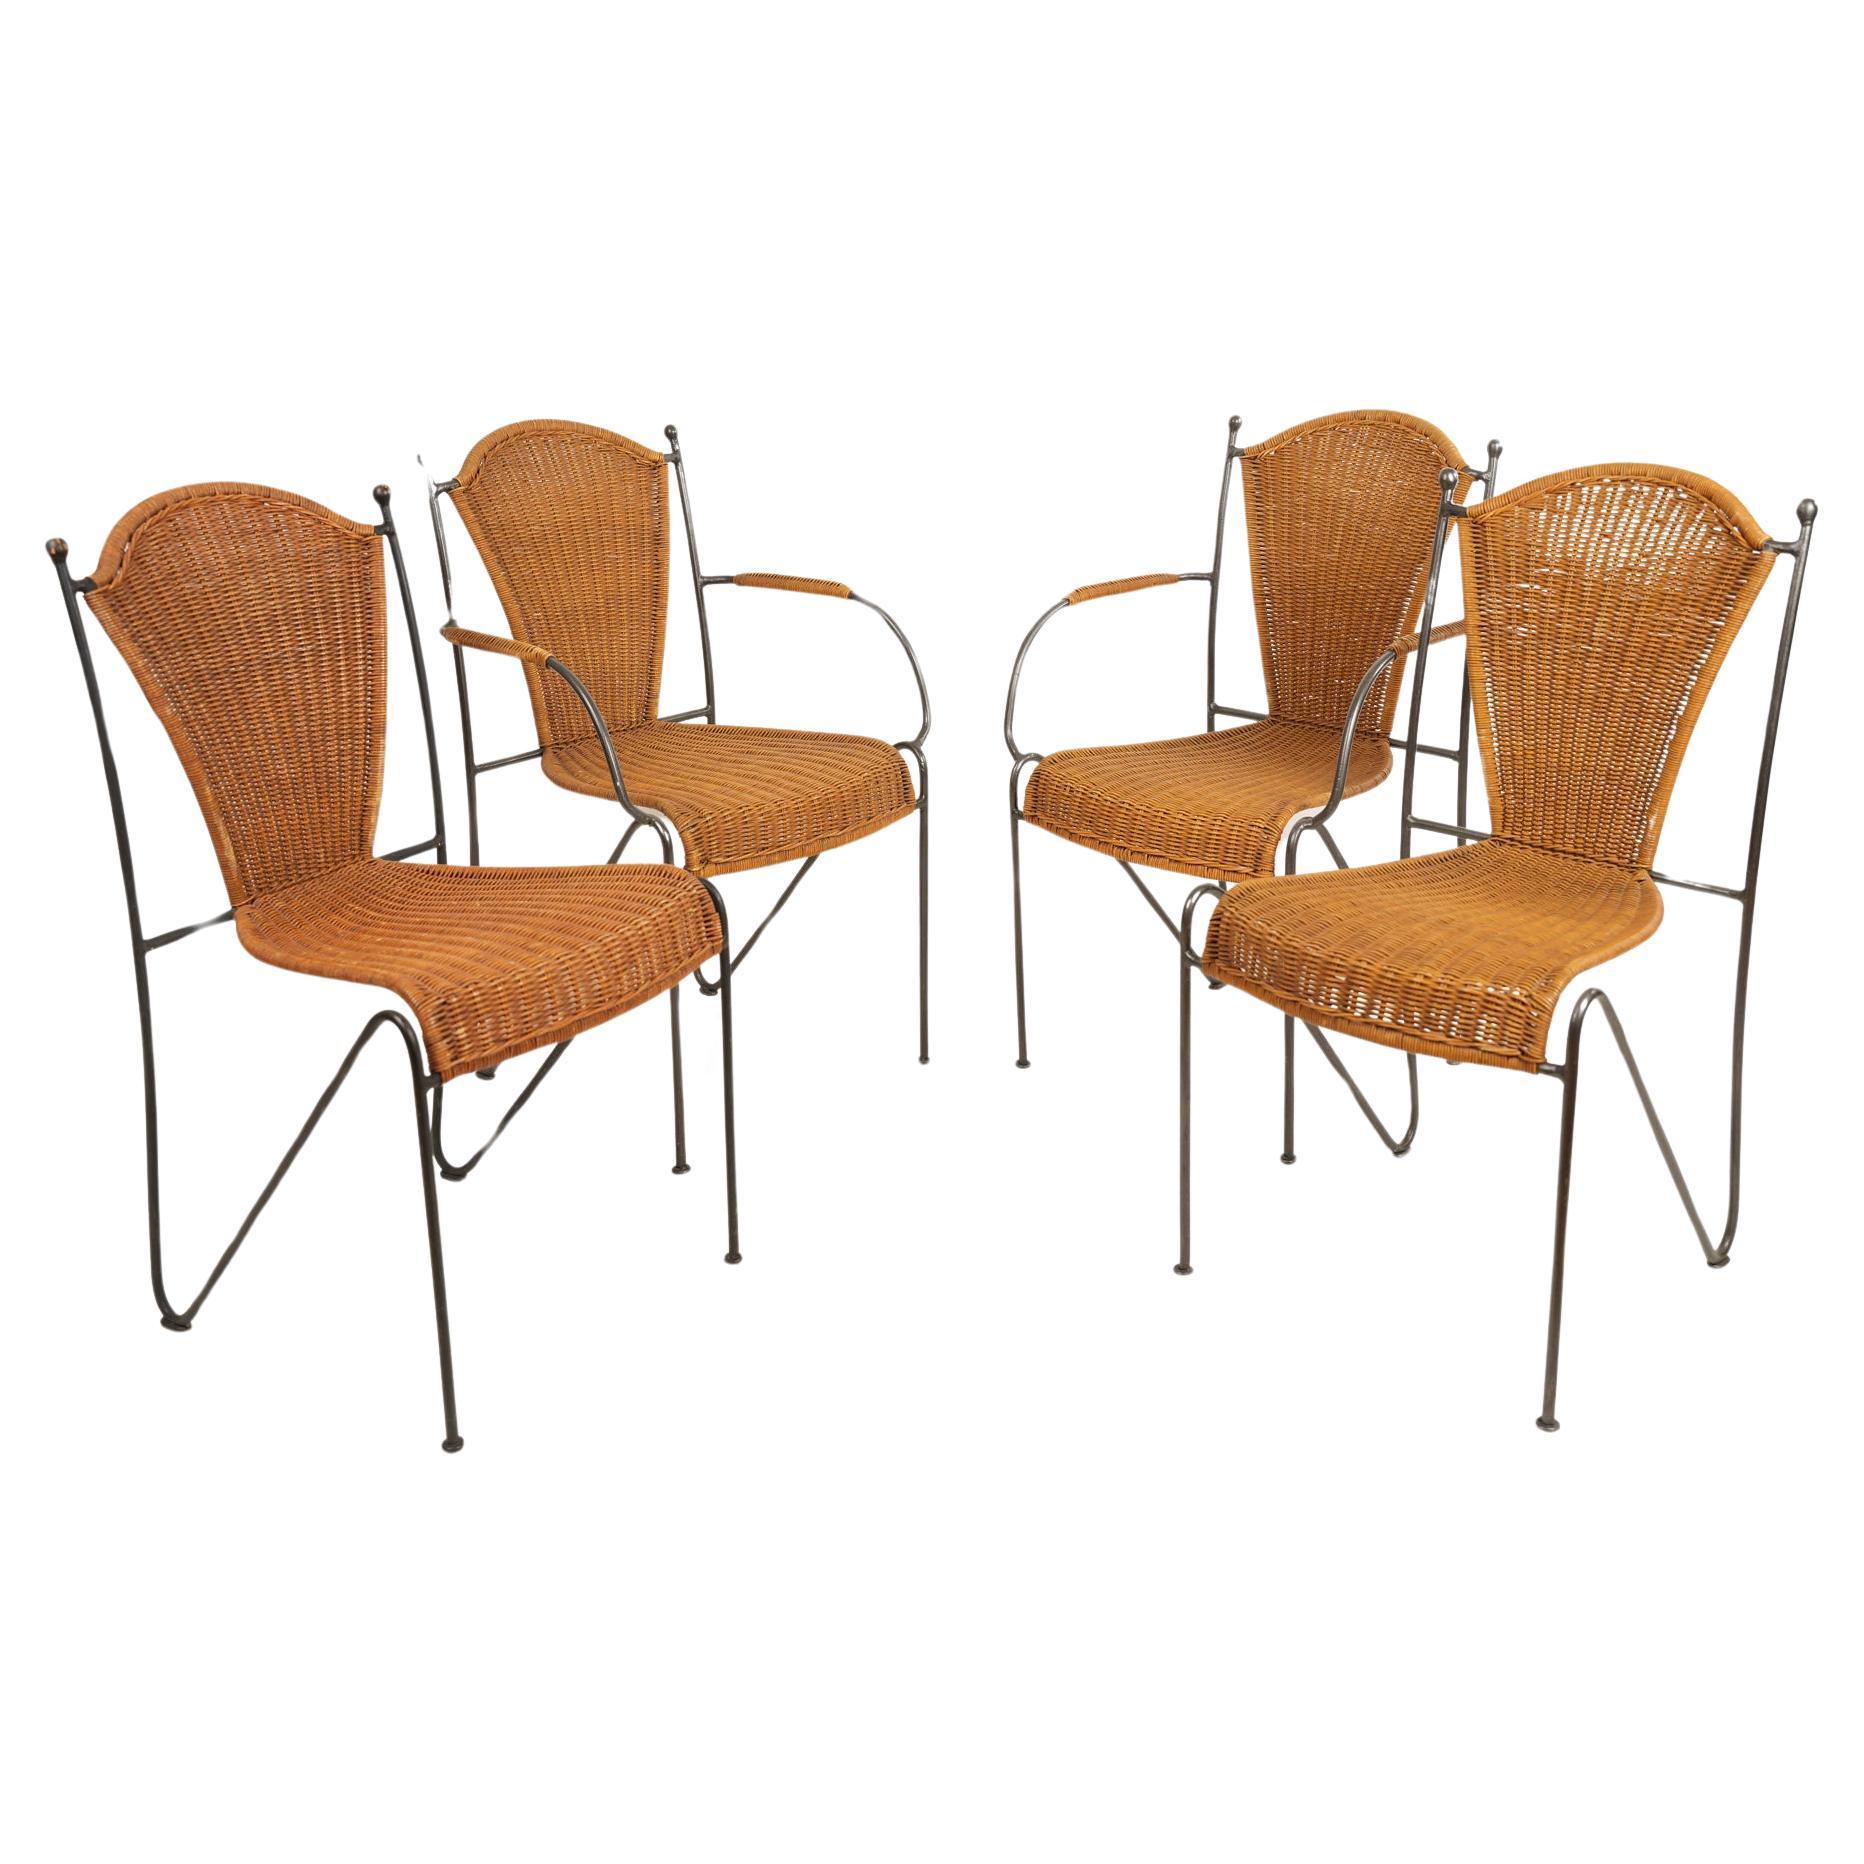 Set of Four Wicker and Iron Chair By Frederic Weinberg 1950s